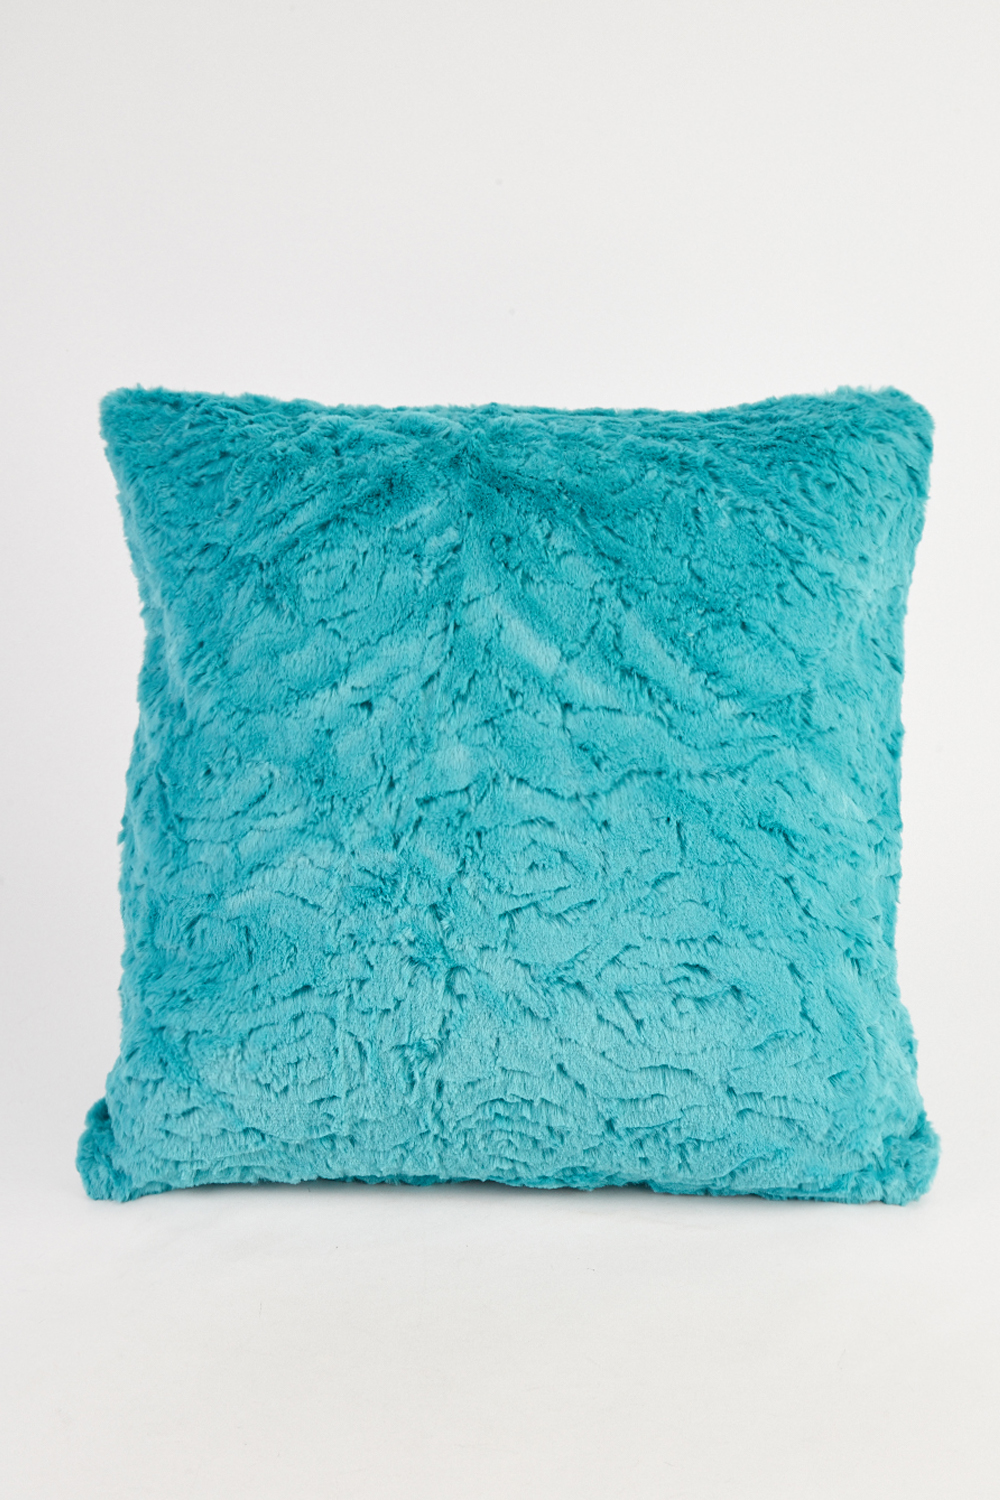 turquoise fluffy pillows